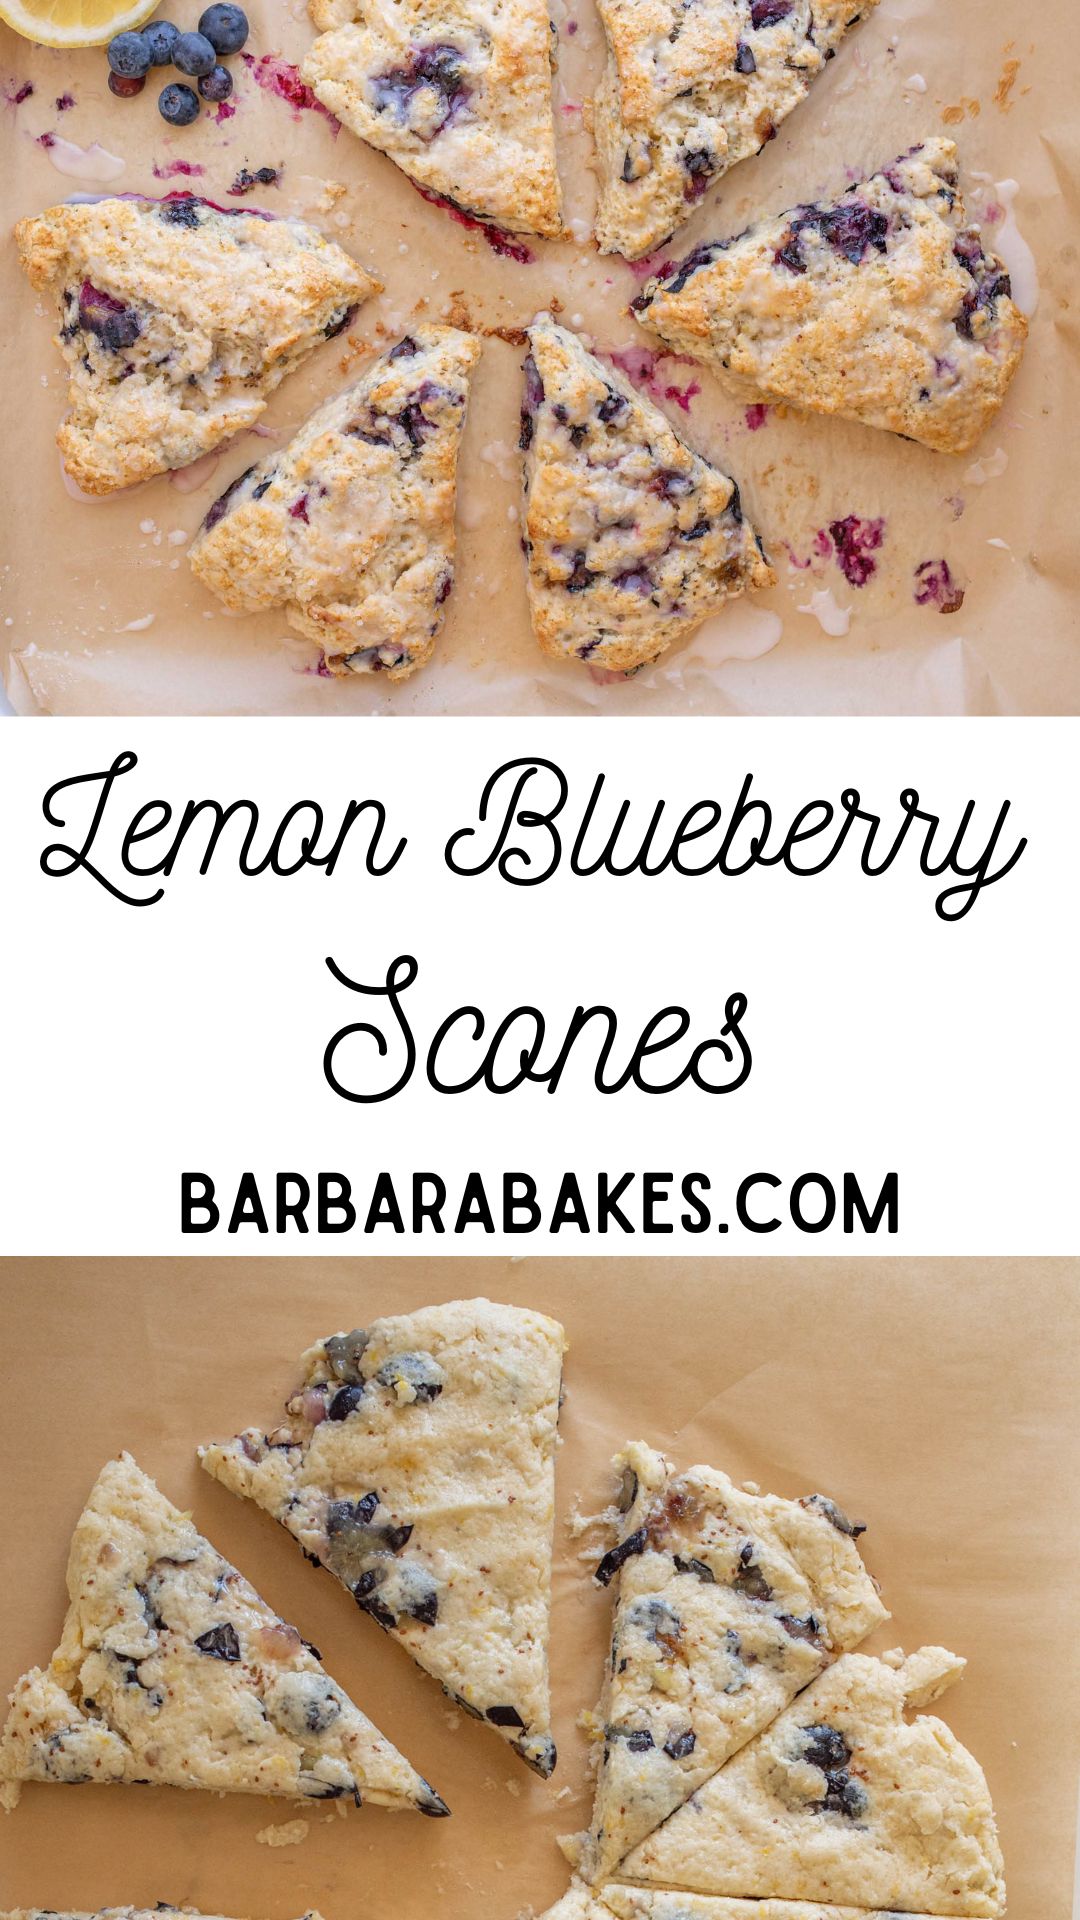 Lemon blueberry scones are made with cream instead of butter, fresh lemon zest, fresh or frozen blueberries and they are a perfect anytime of day! via @barbarabakes